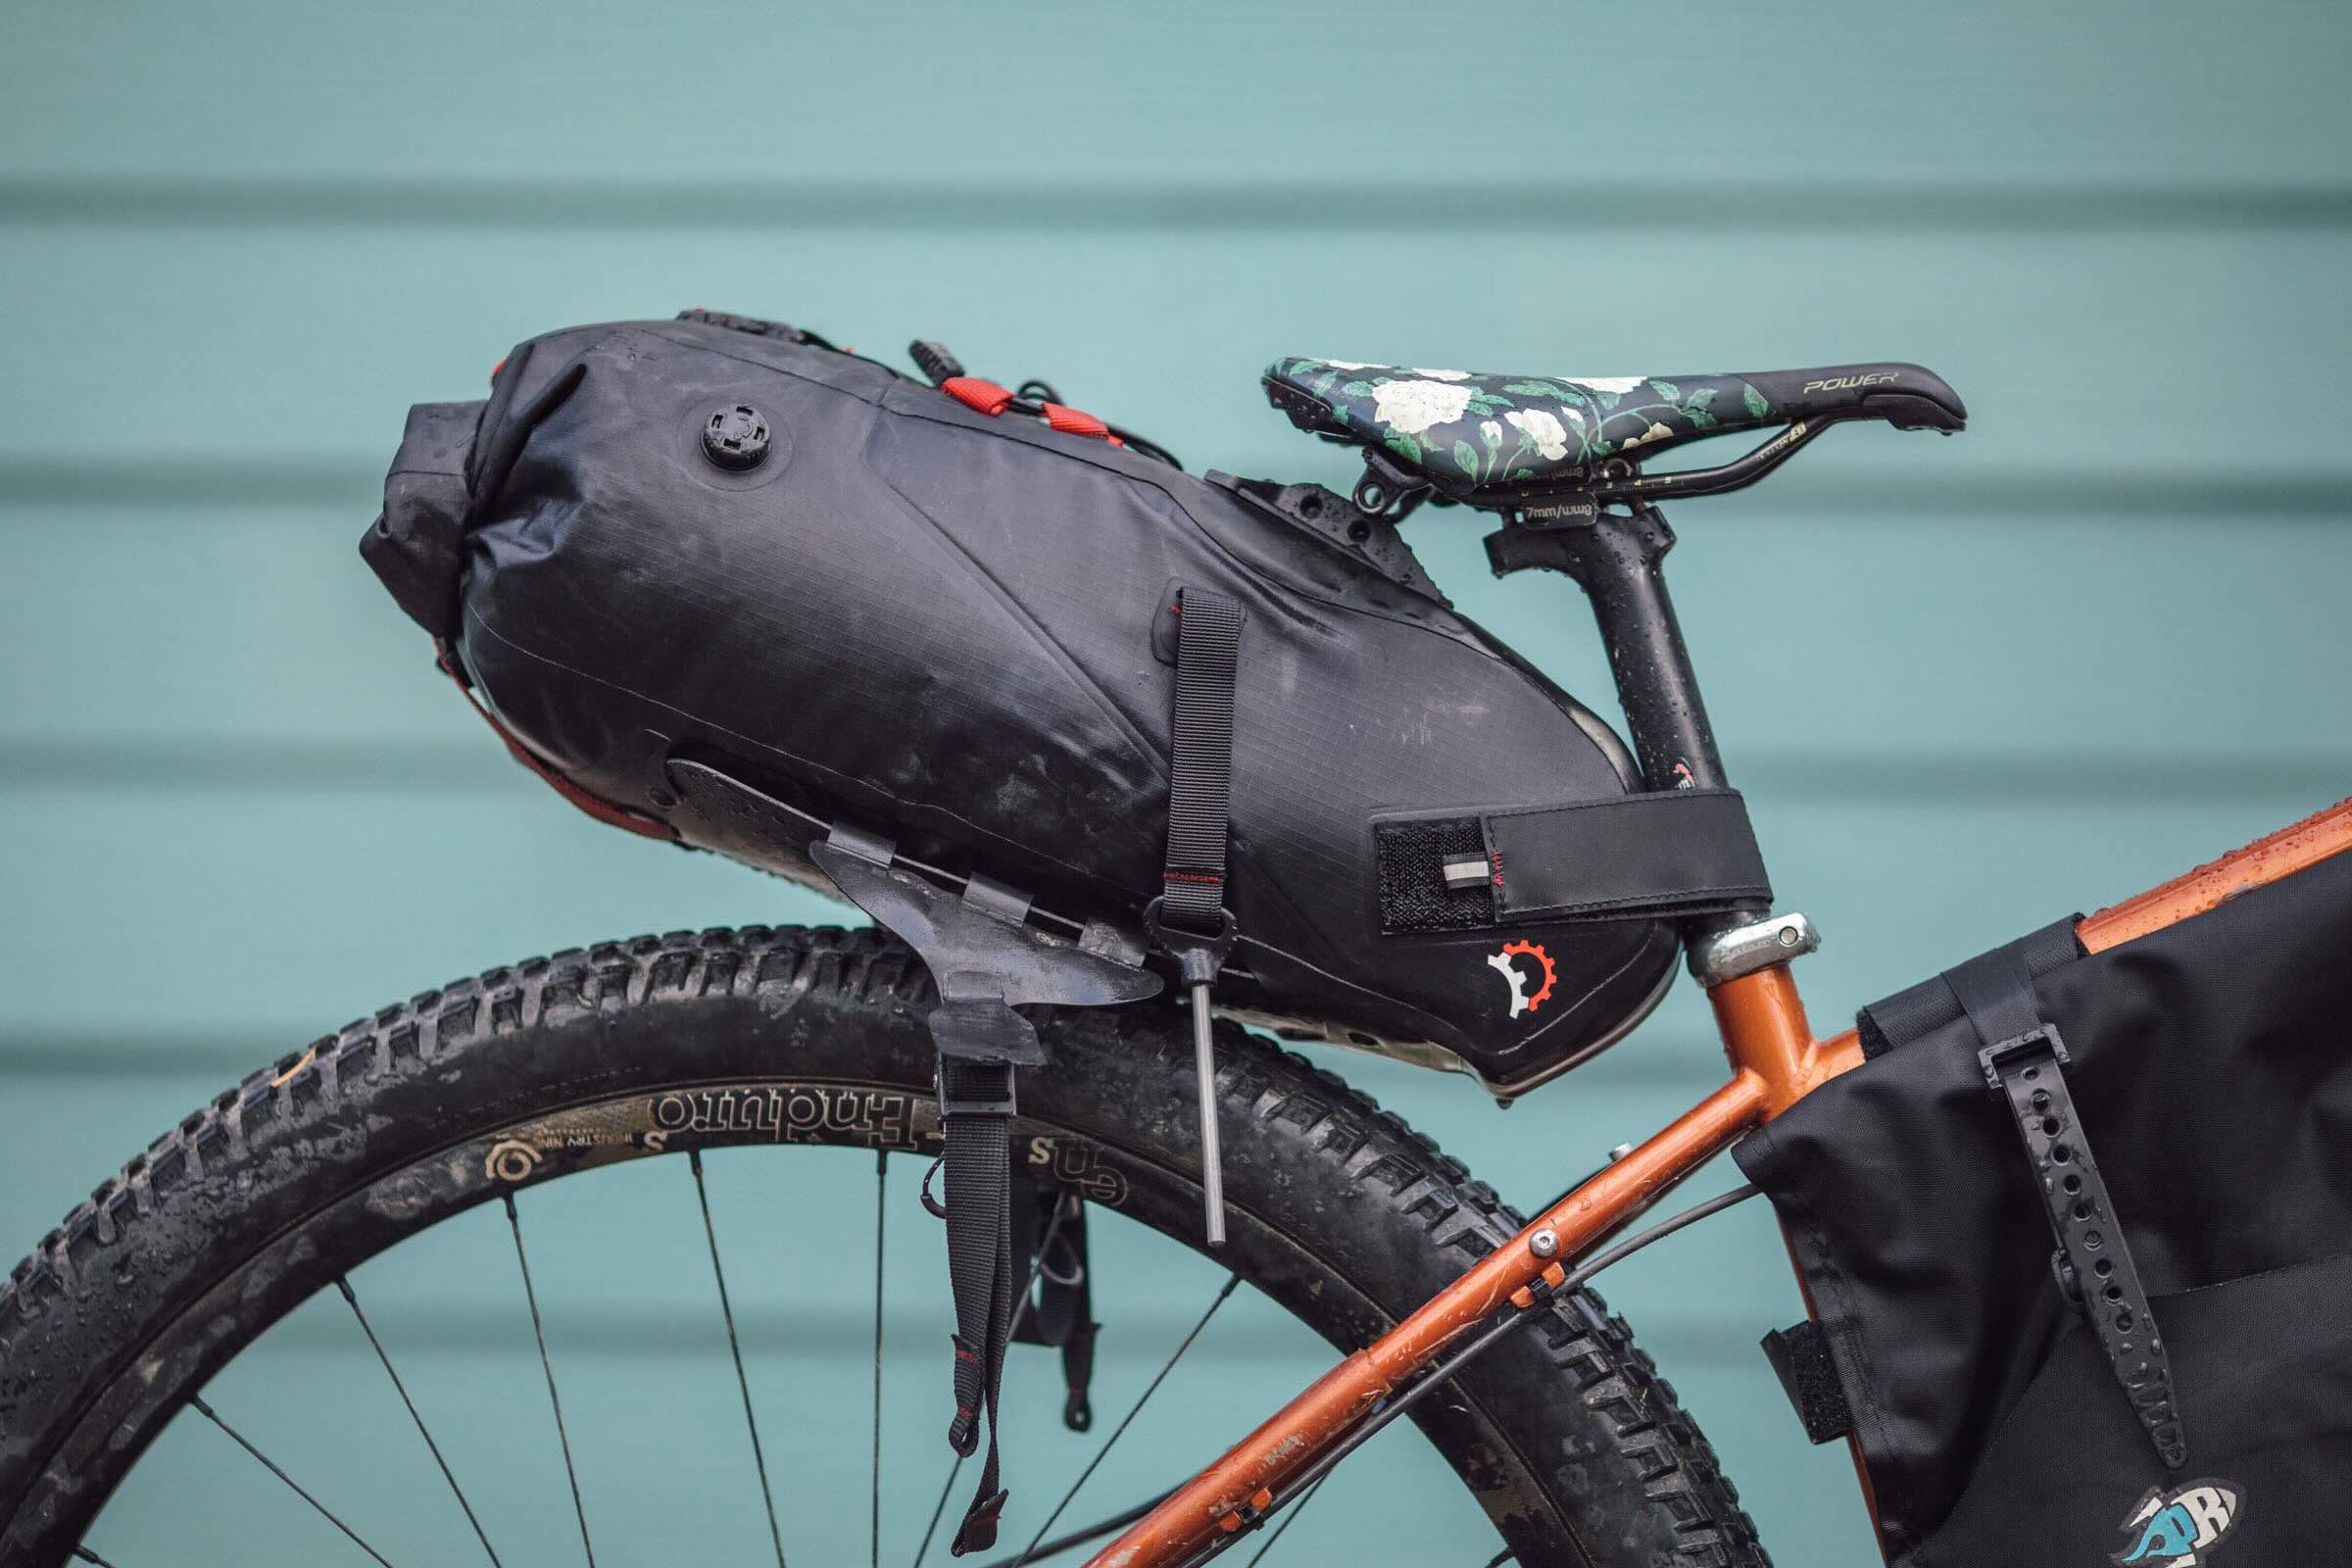 Review: Best Saddle Bag for Bikes